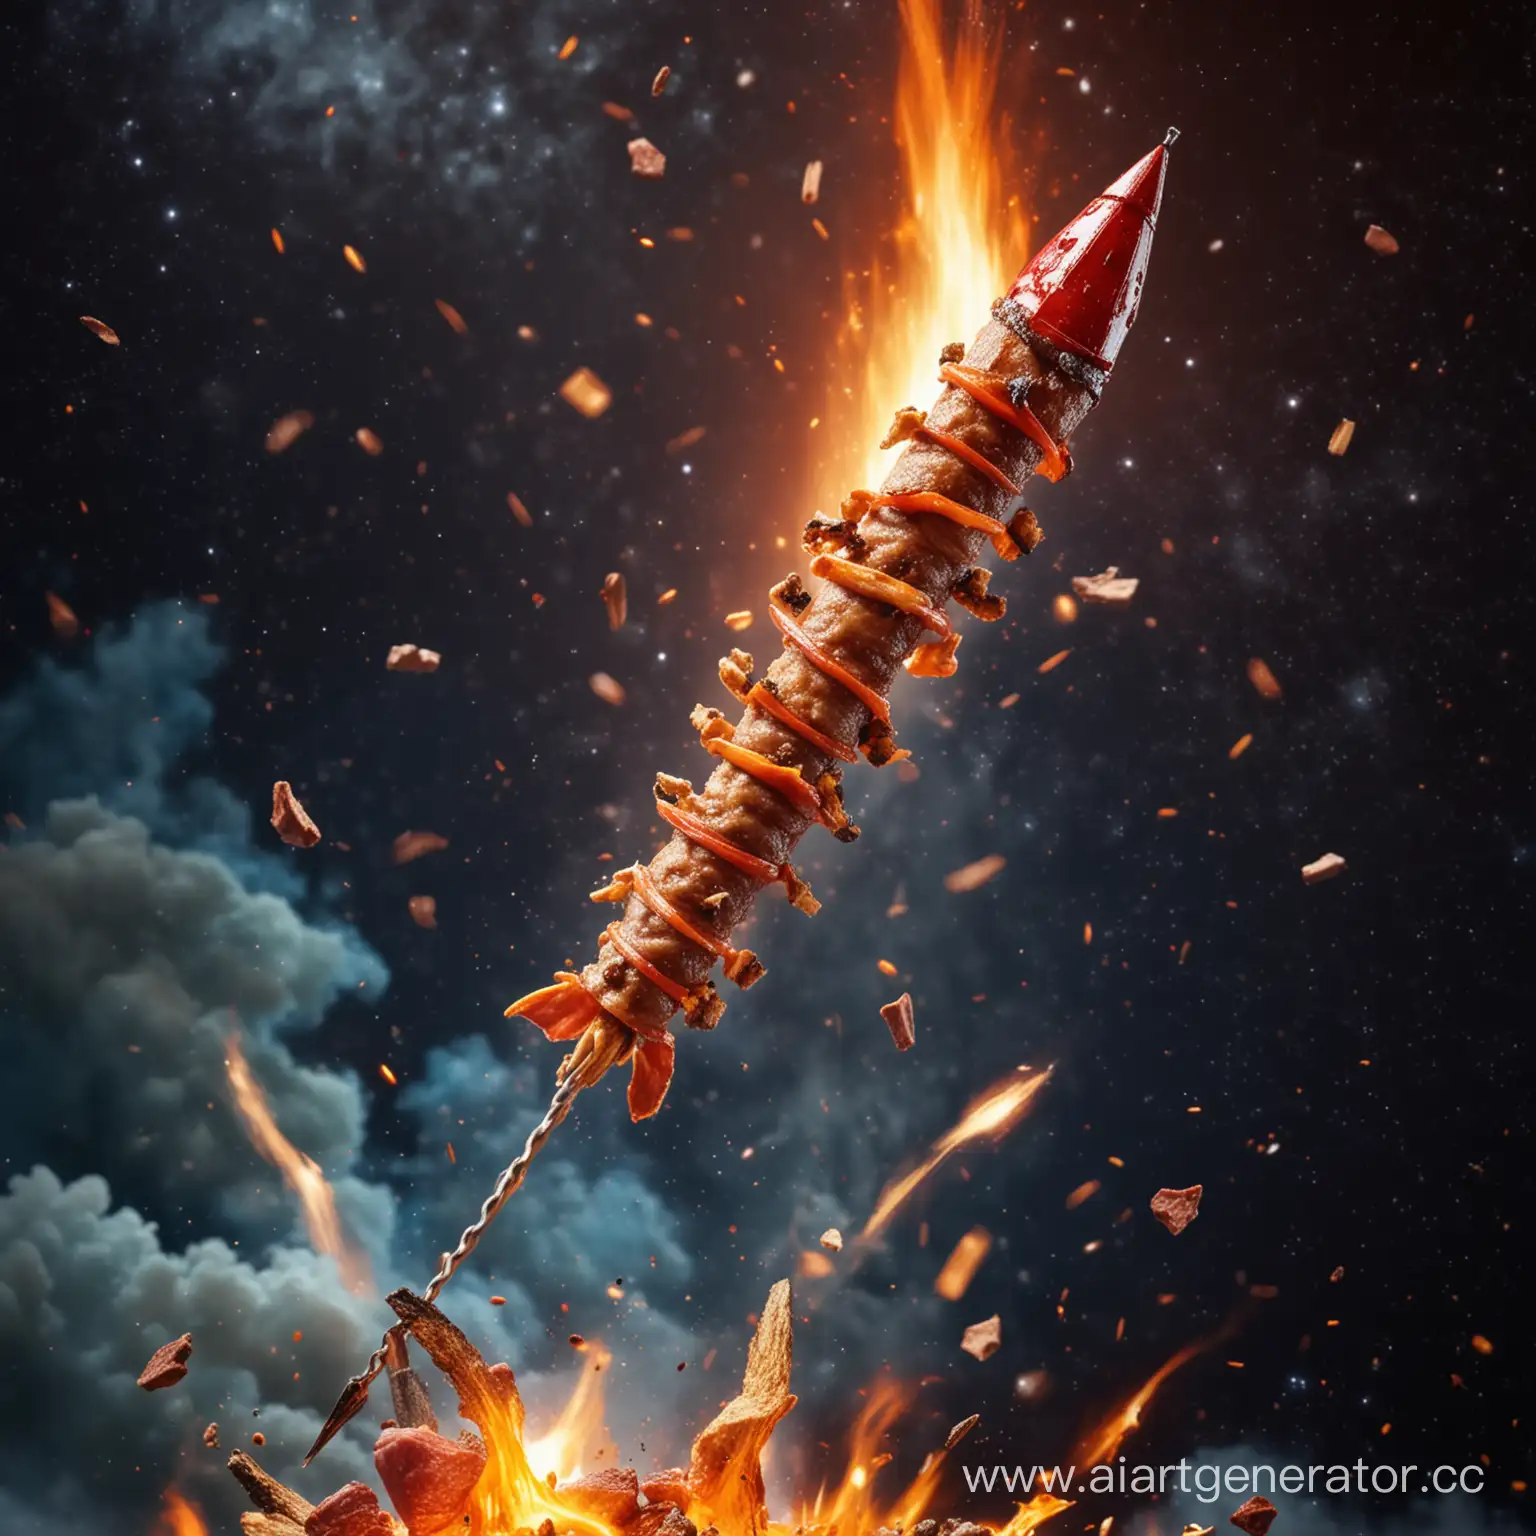 Space-BBQ-Rocket-Skewer-with-Meat-against-Fiery-Background